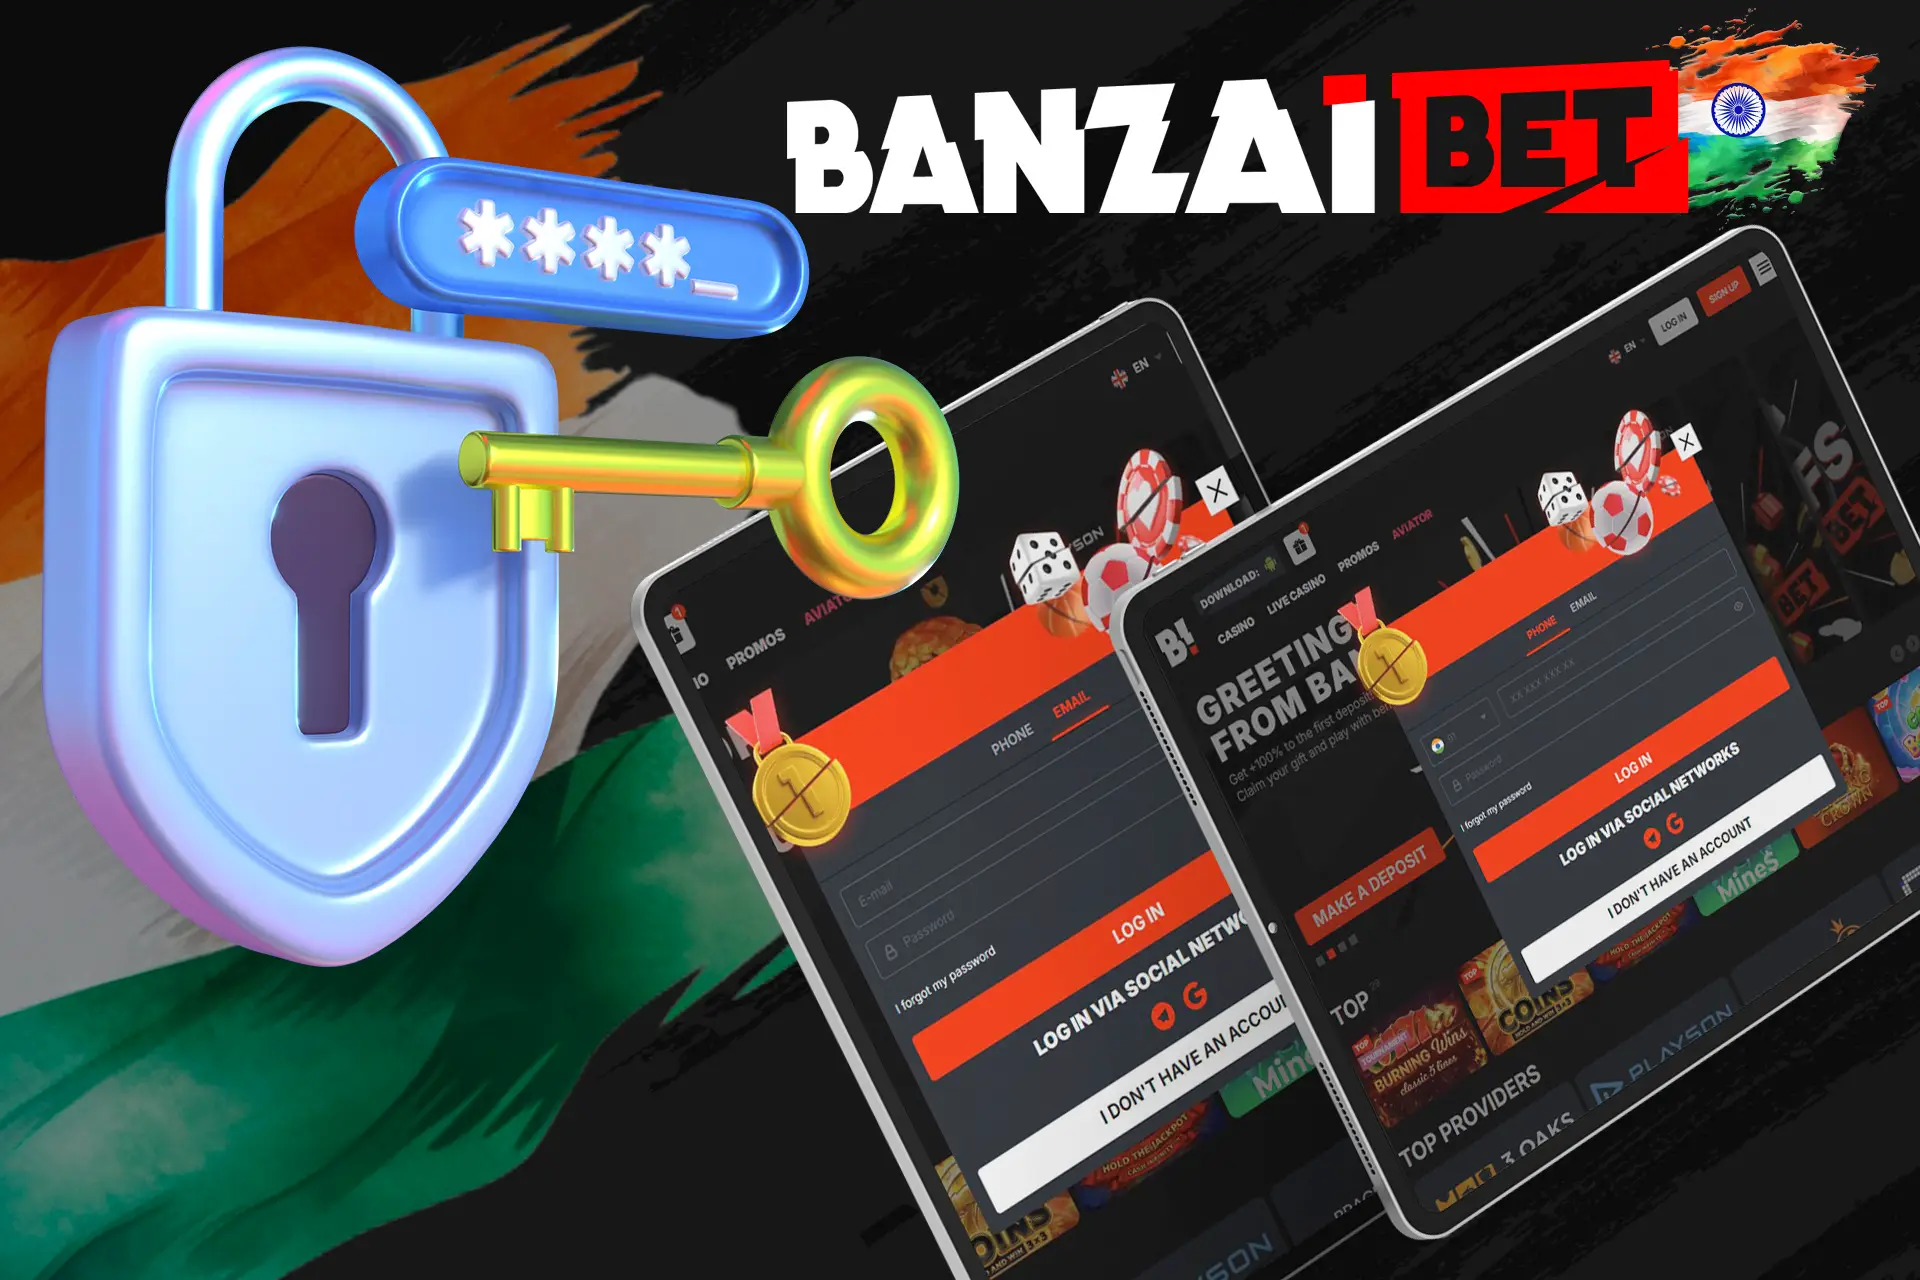 Log in to the Banzaibet India website